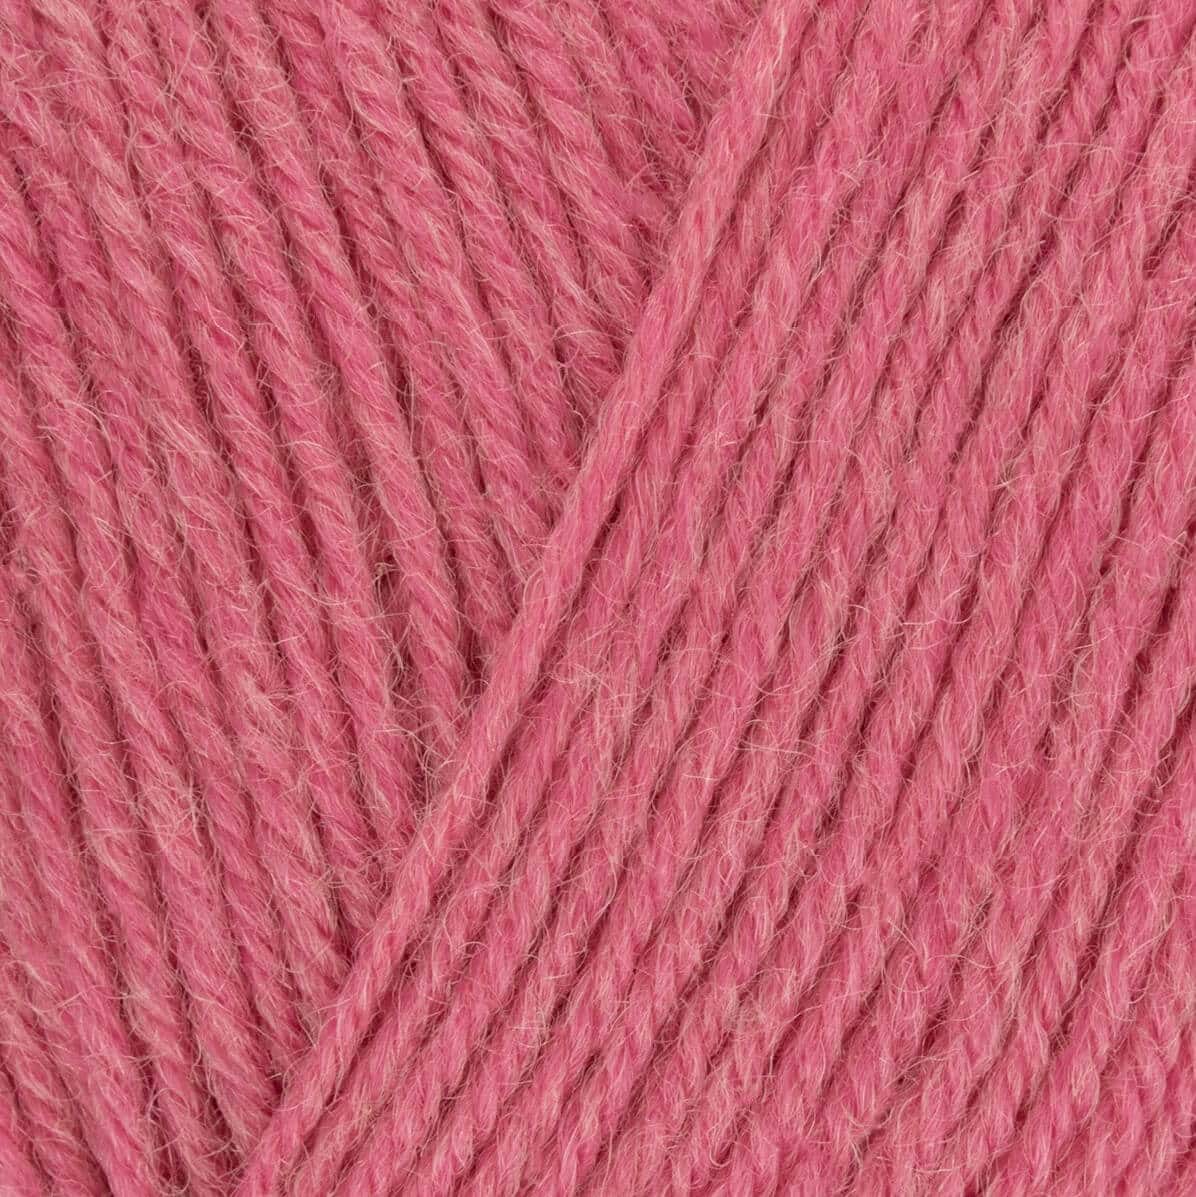 West Yorkshire Spinners Signature 4ply - Honeysuckle 234